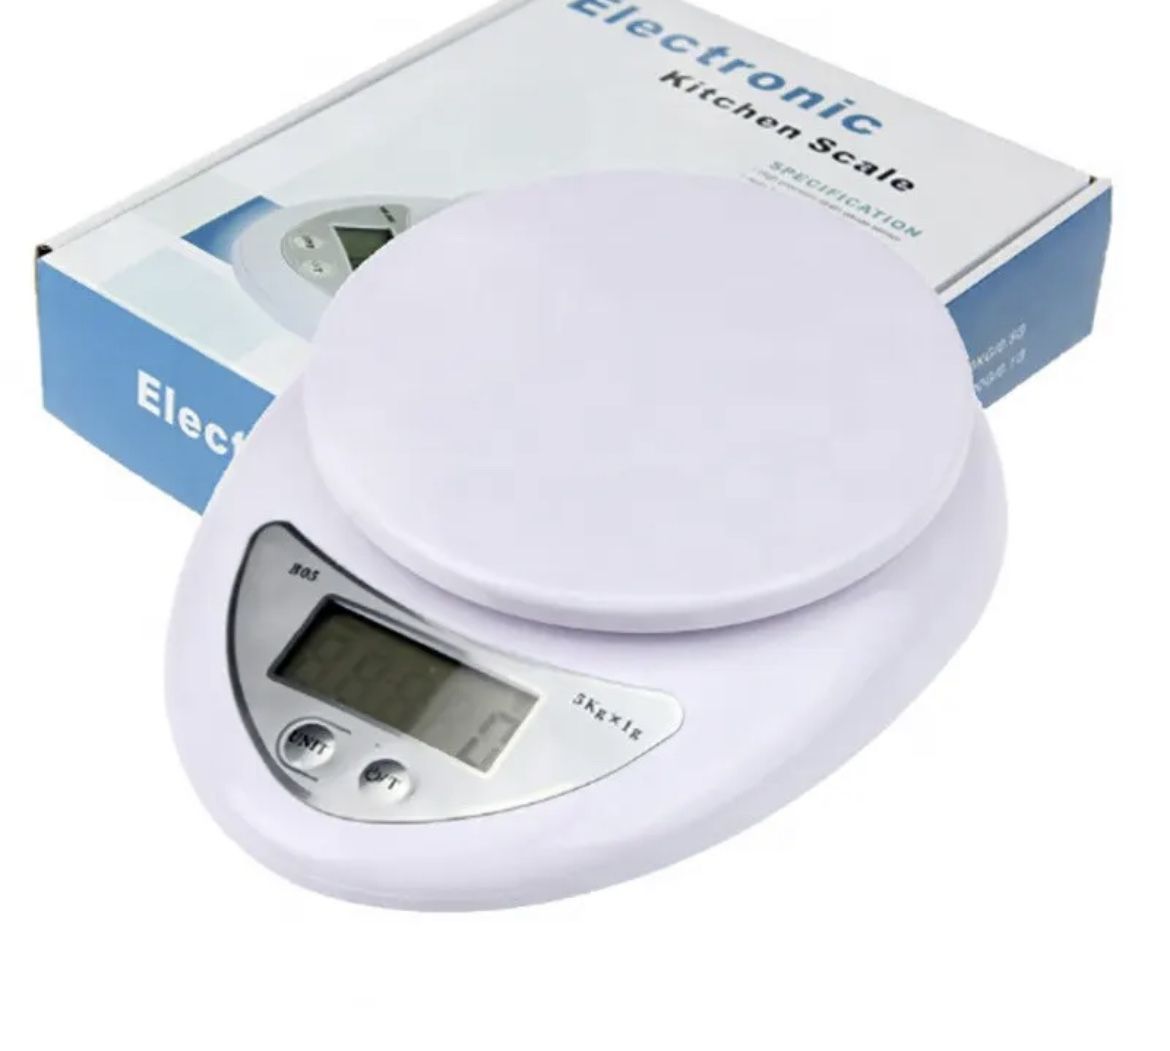 5kg LED Portable Digital Scale Scales Food Balance Measuring Weight Kitchen Electronic Sca